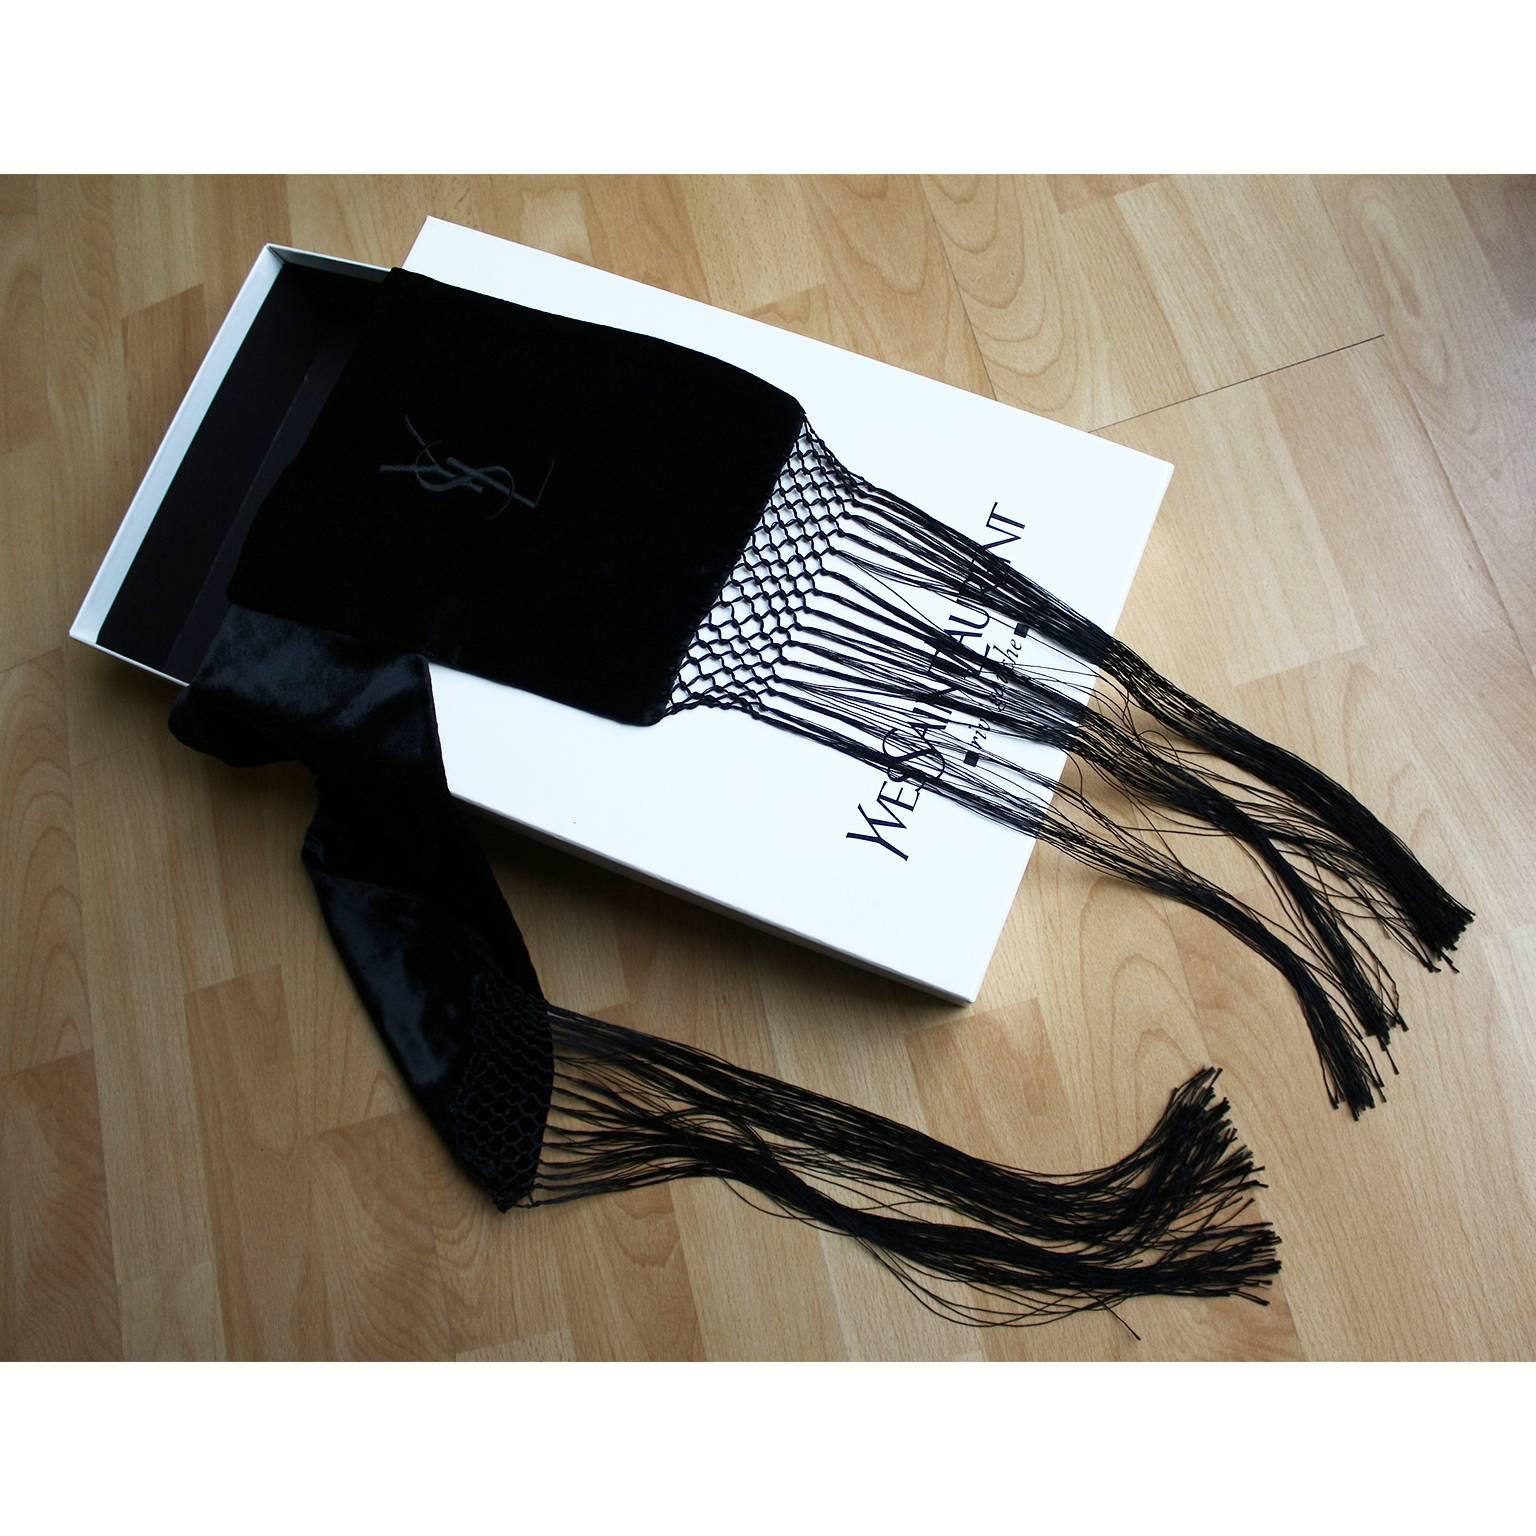  The black velvet scarve is in a excellent condition.